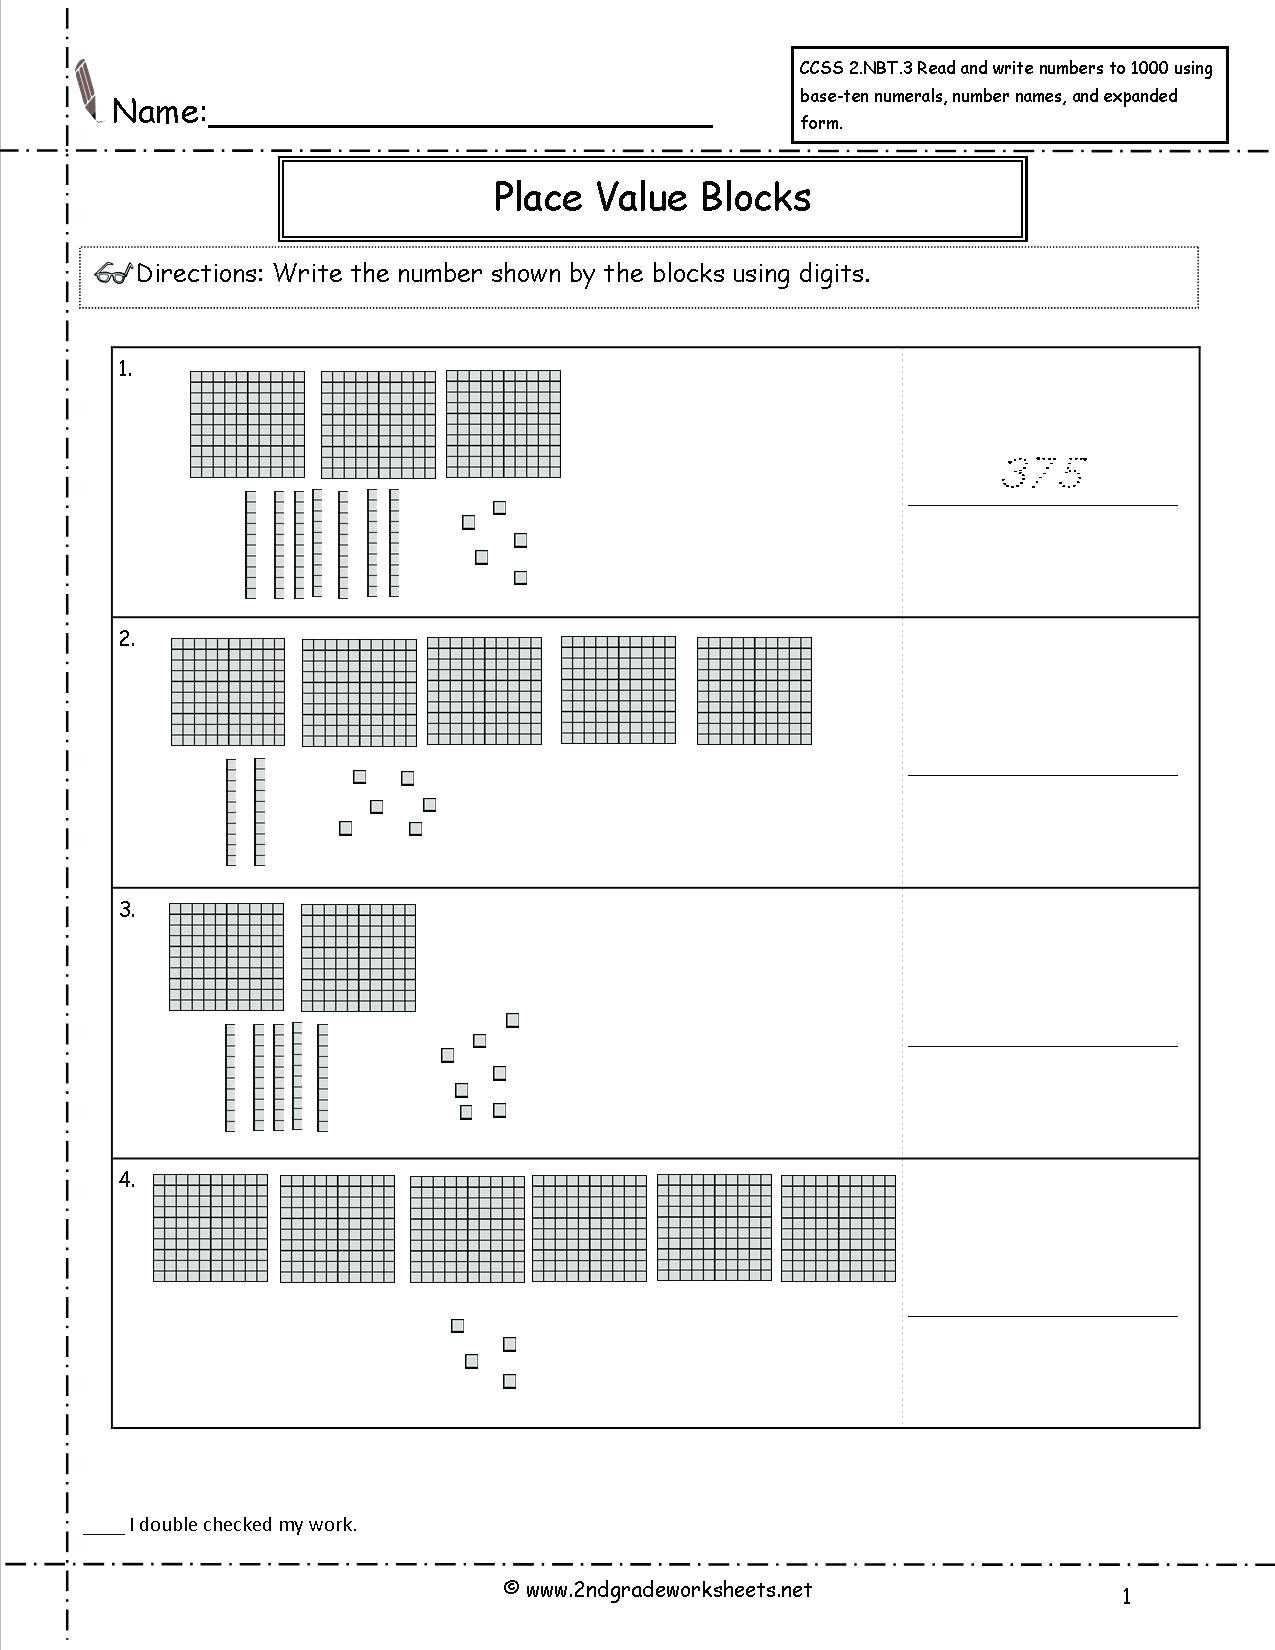 Free Math Worksheets Second Grade 2 Place Value Rounding Round 3 Digit Numbers Nearest 10